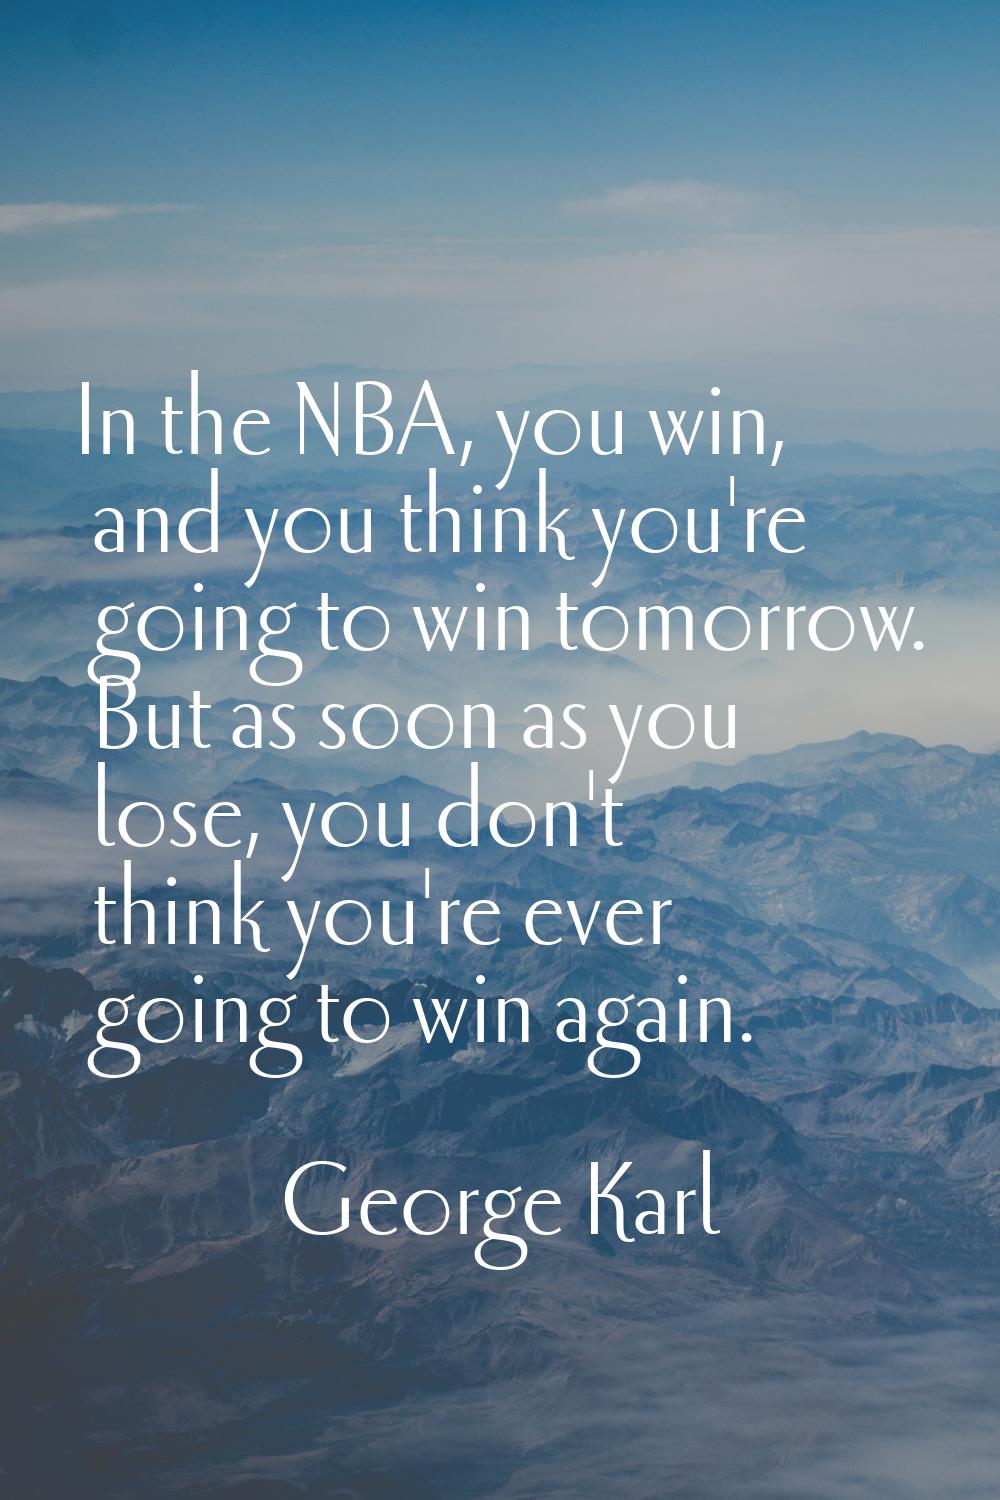 In the NBA, you win, and you think you're going to win tomorrow. But as soon as you lose, you don't